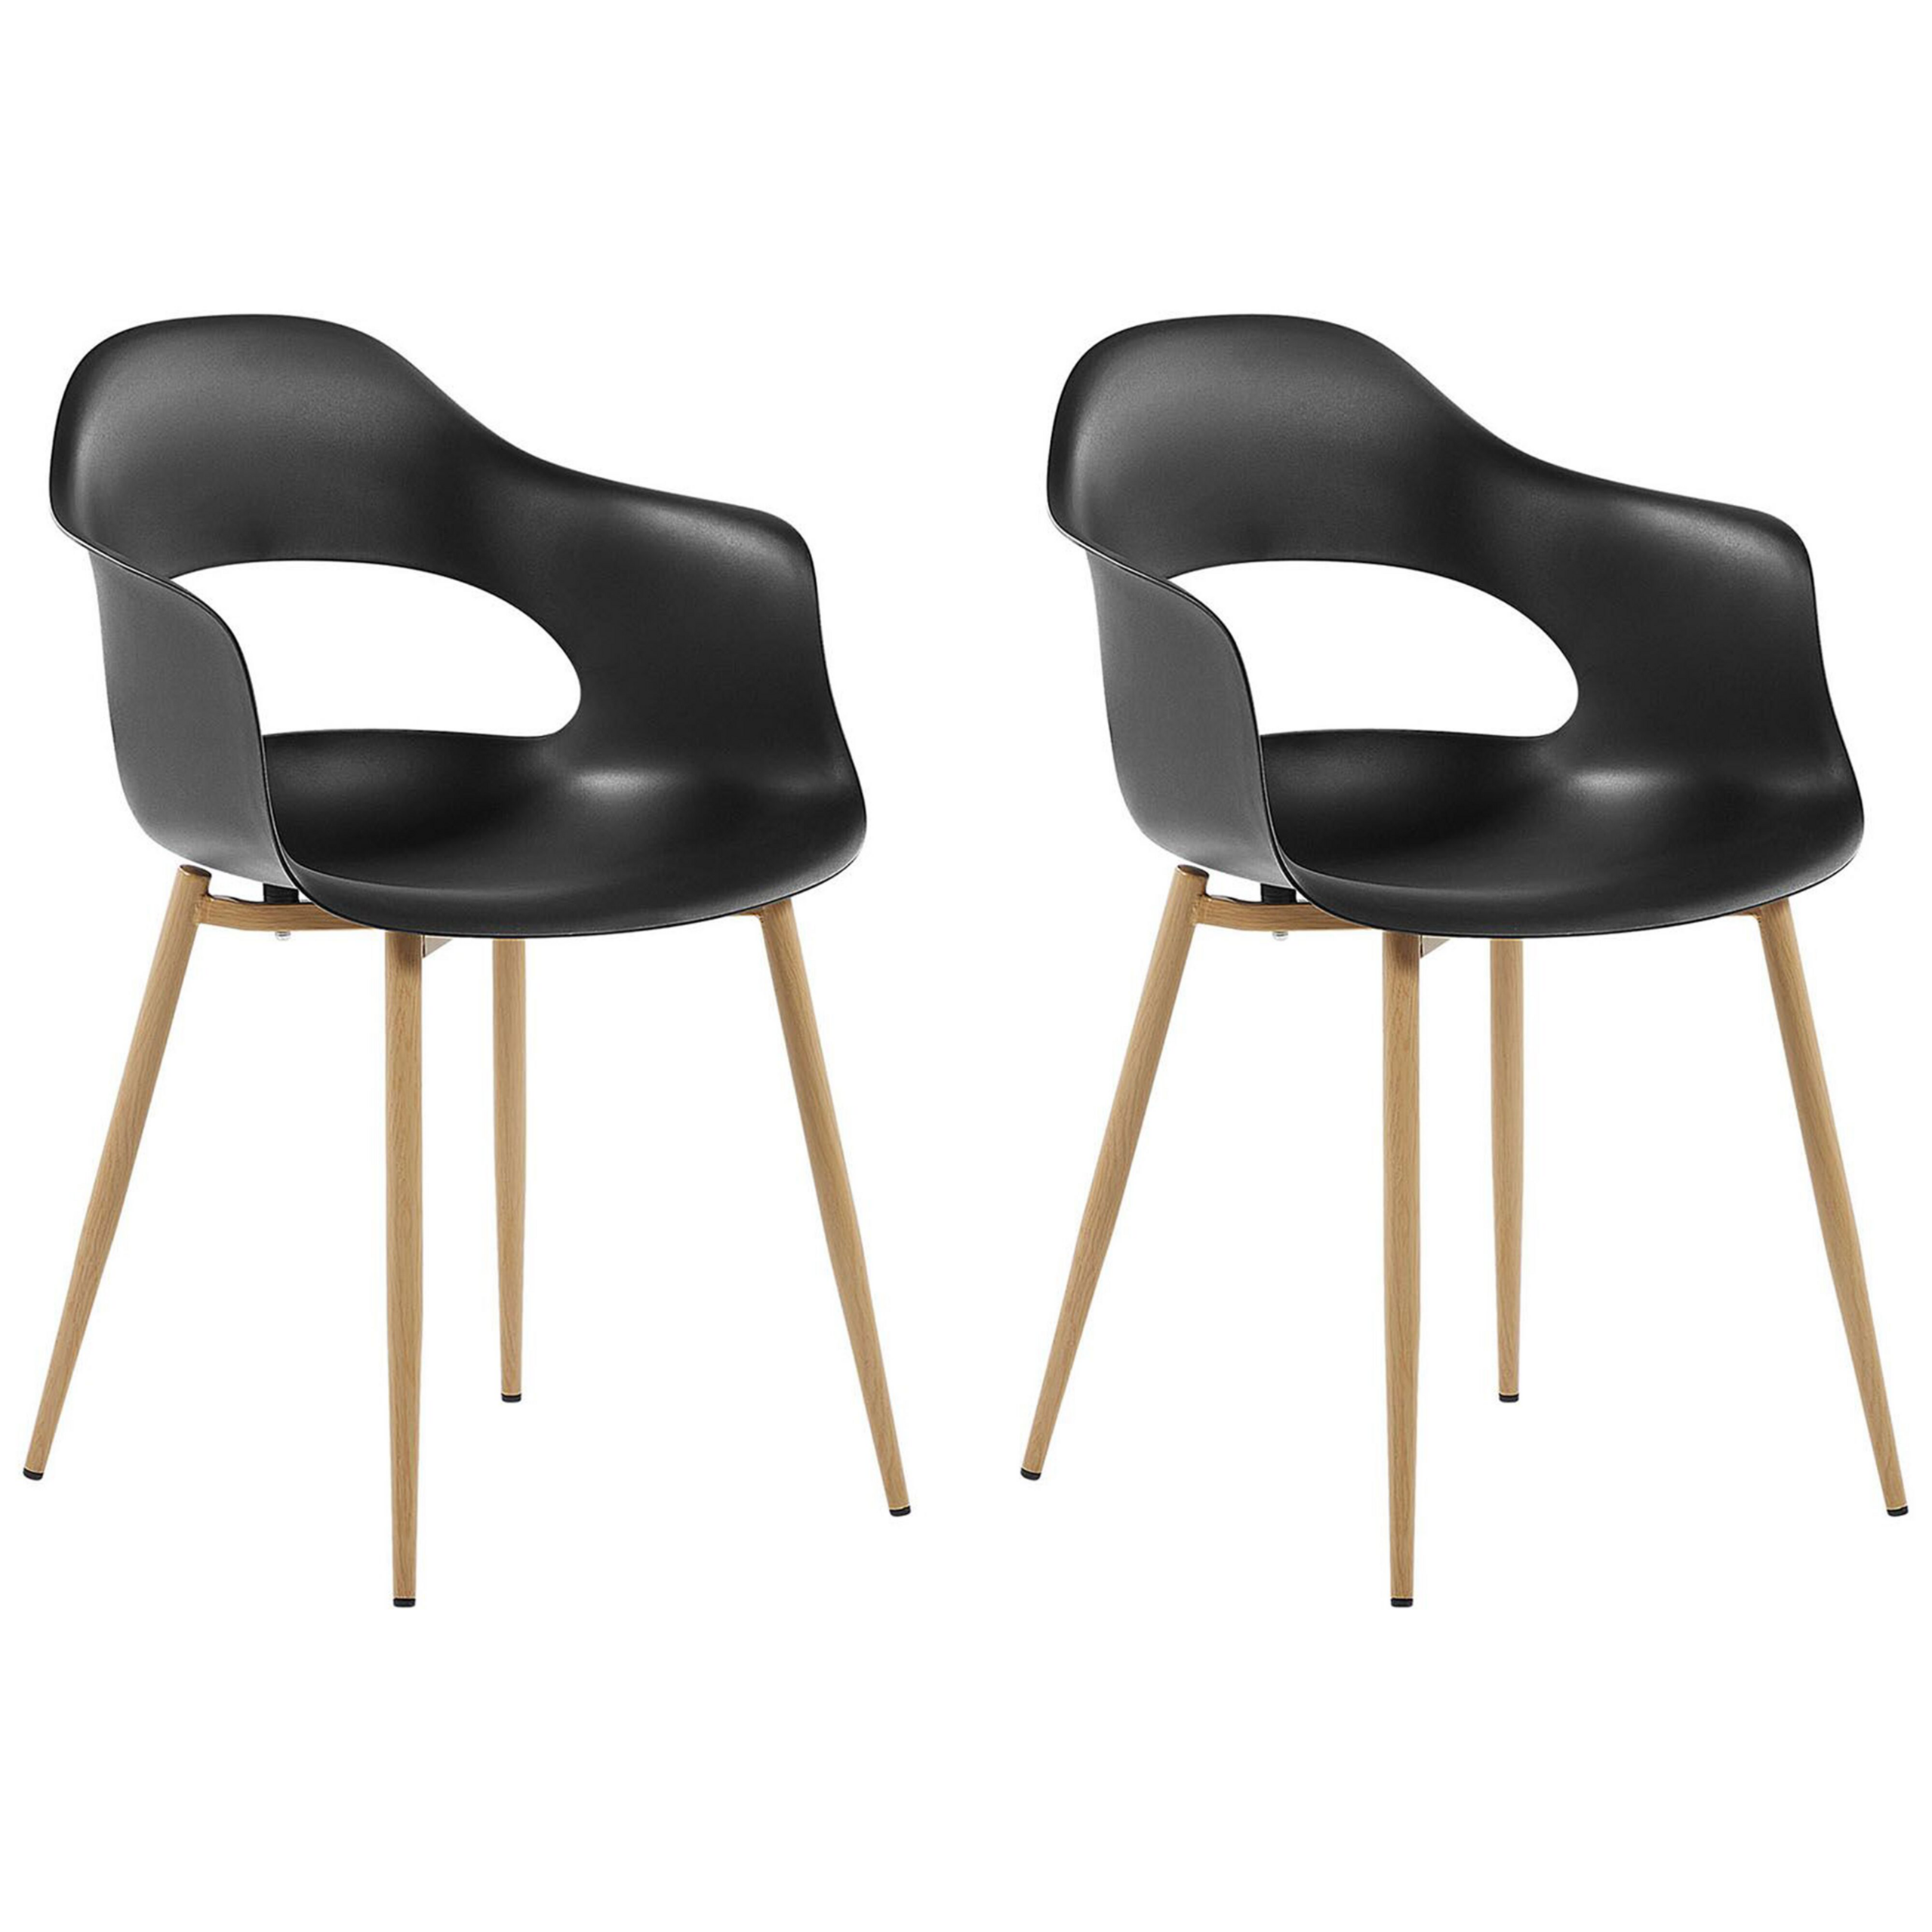 Beliani Set of 2 Dining Chairs Black Synthetic Material Sleek Legs Decorative